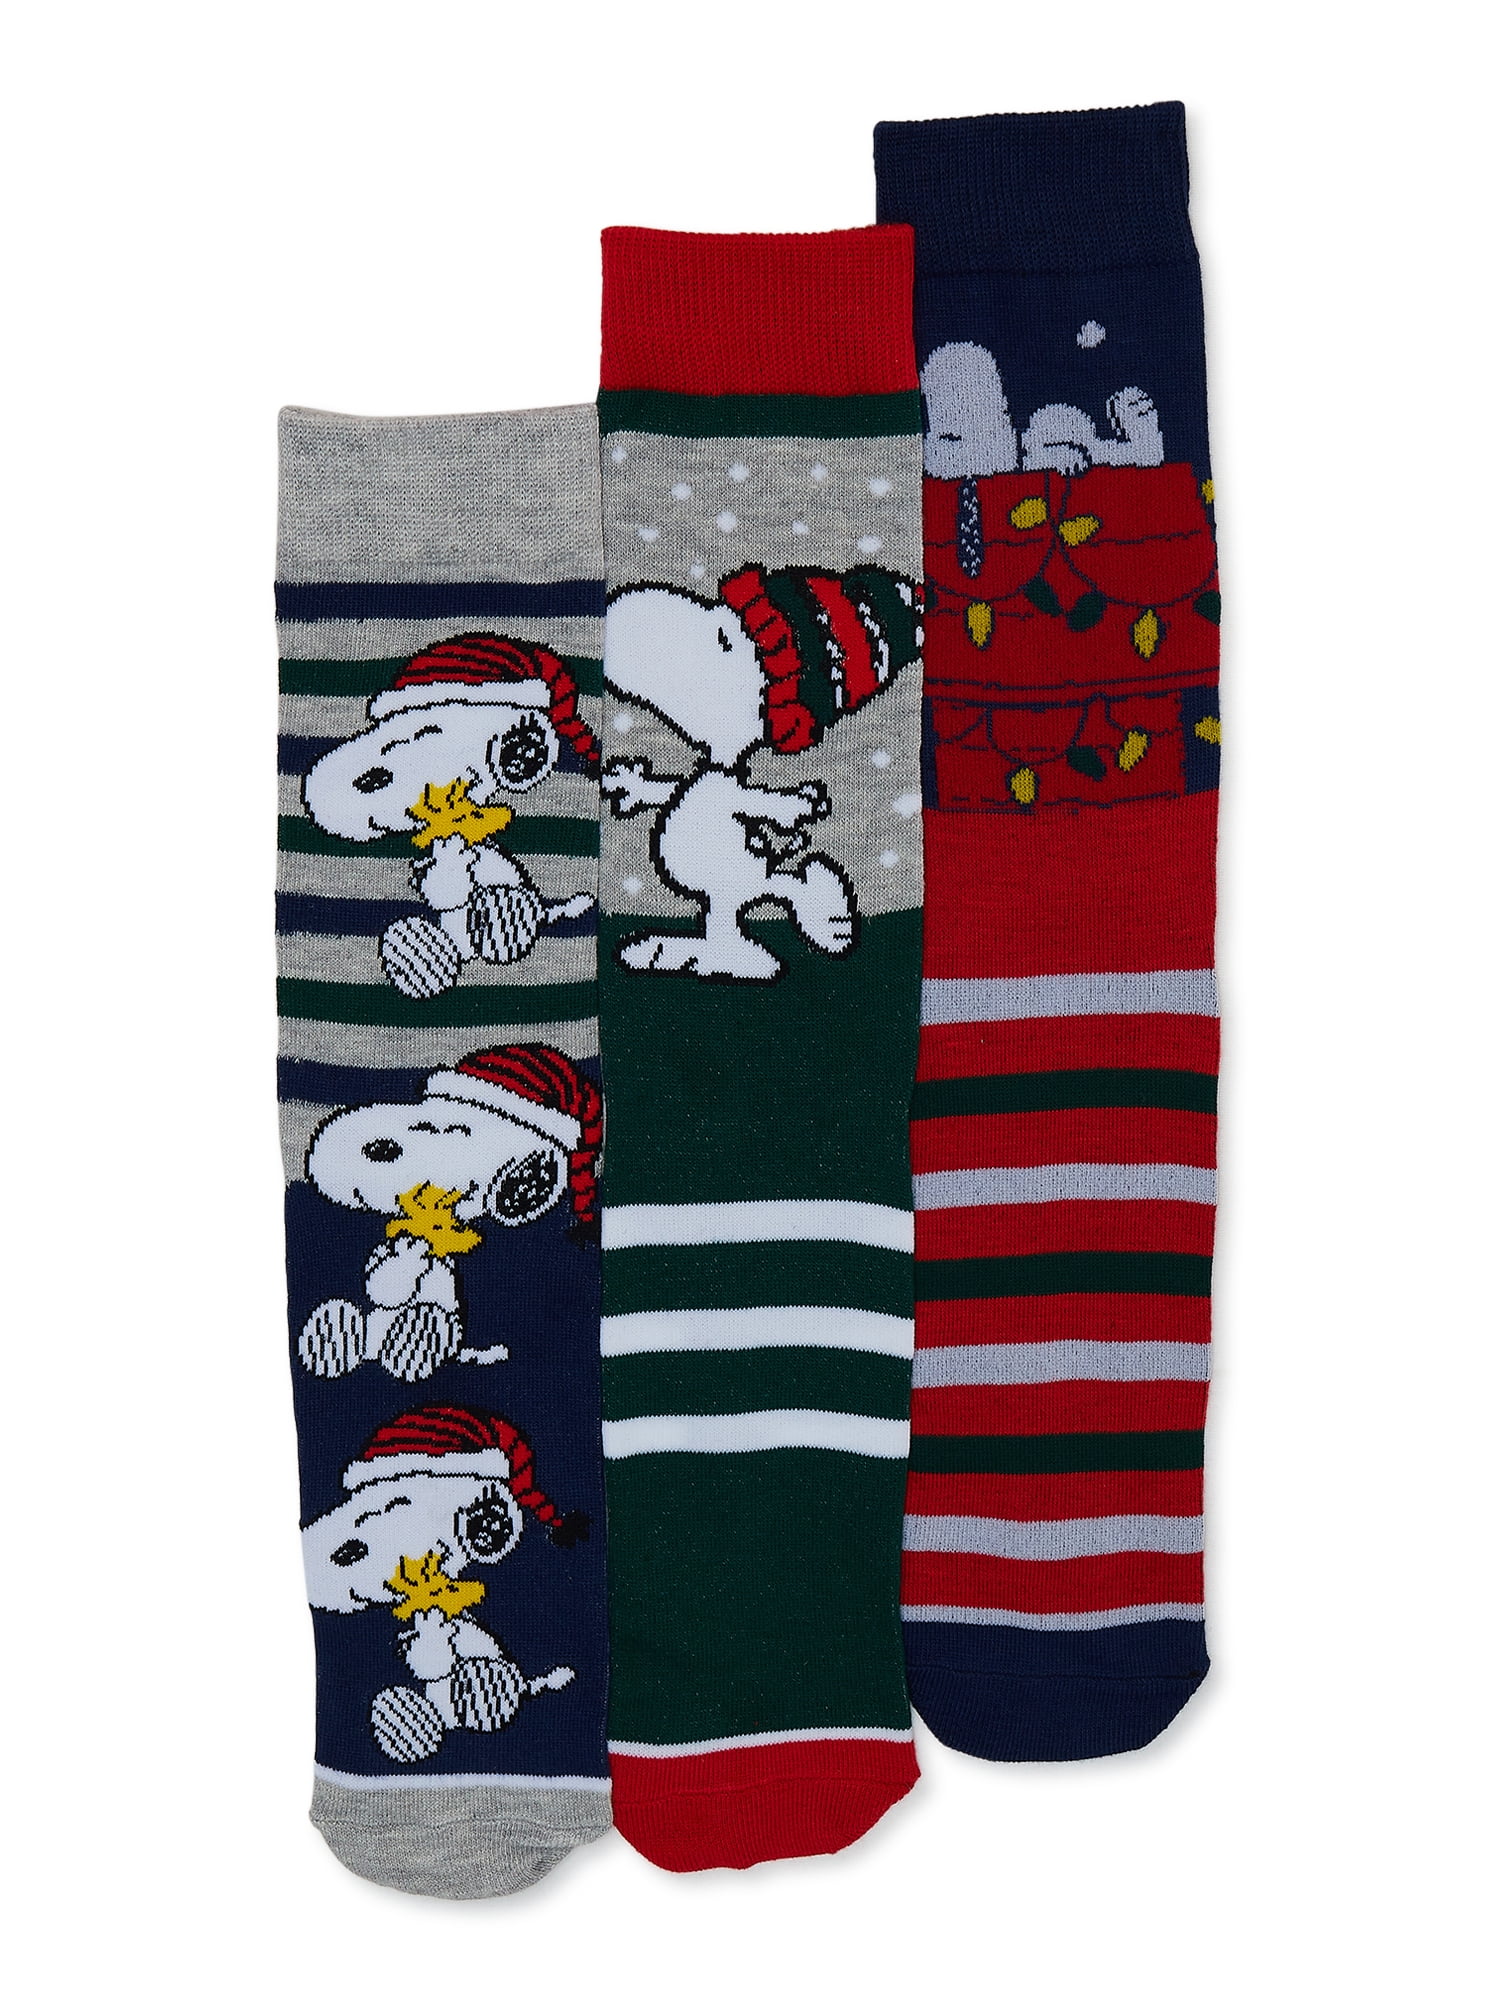 Peanuts Men's 3-Pack of Crew Socks with Novelty Gift Box, Sizes 8-12 ...